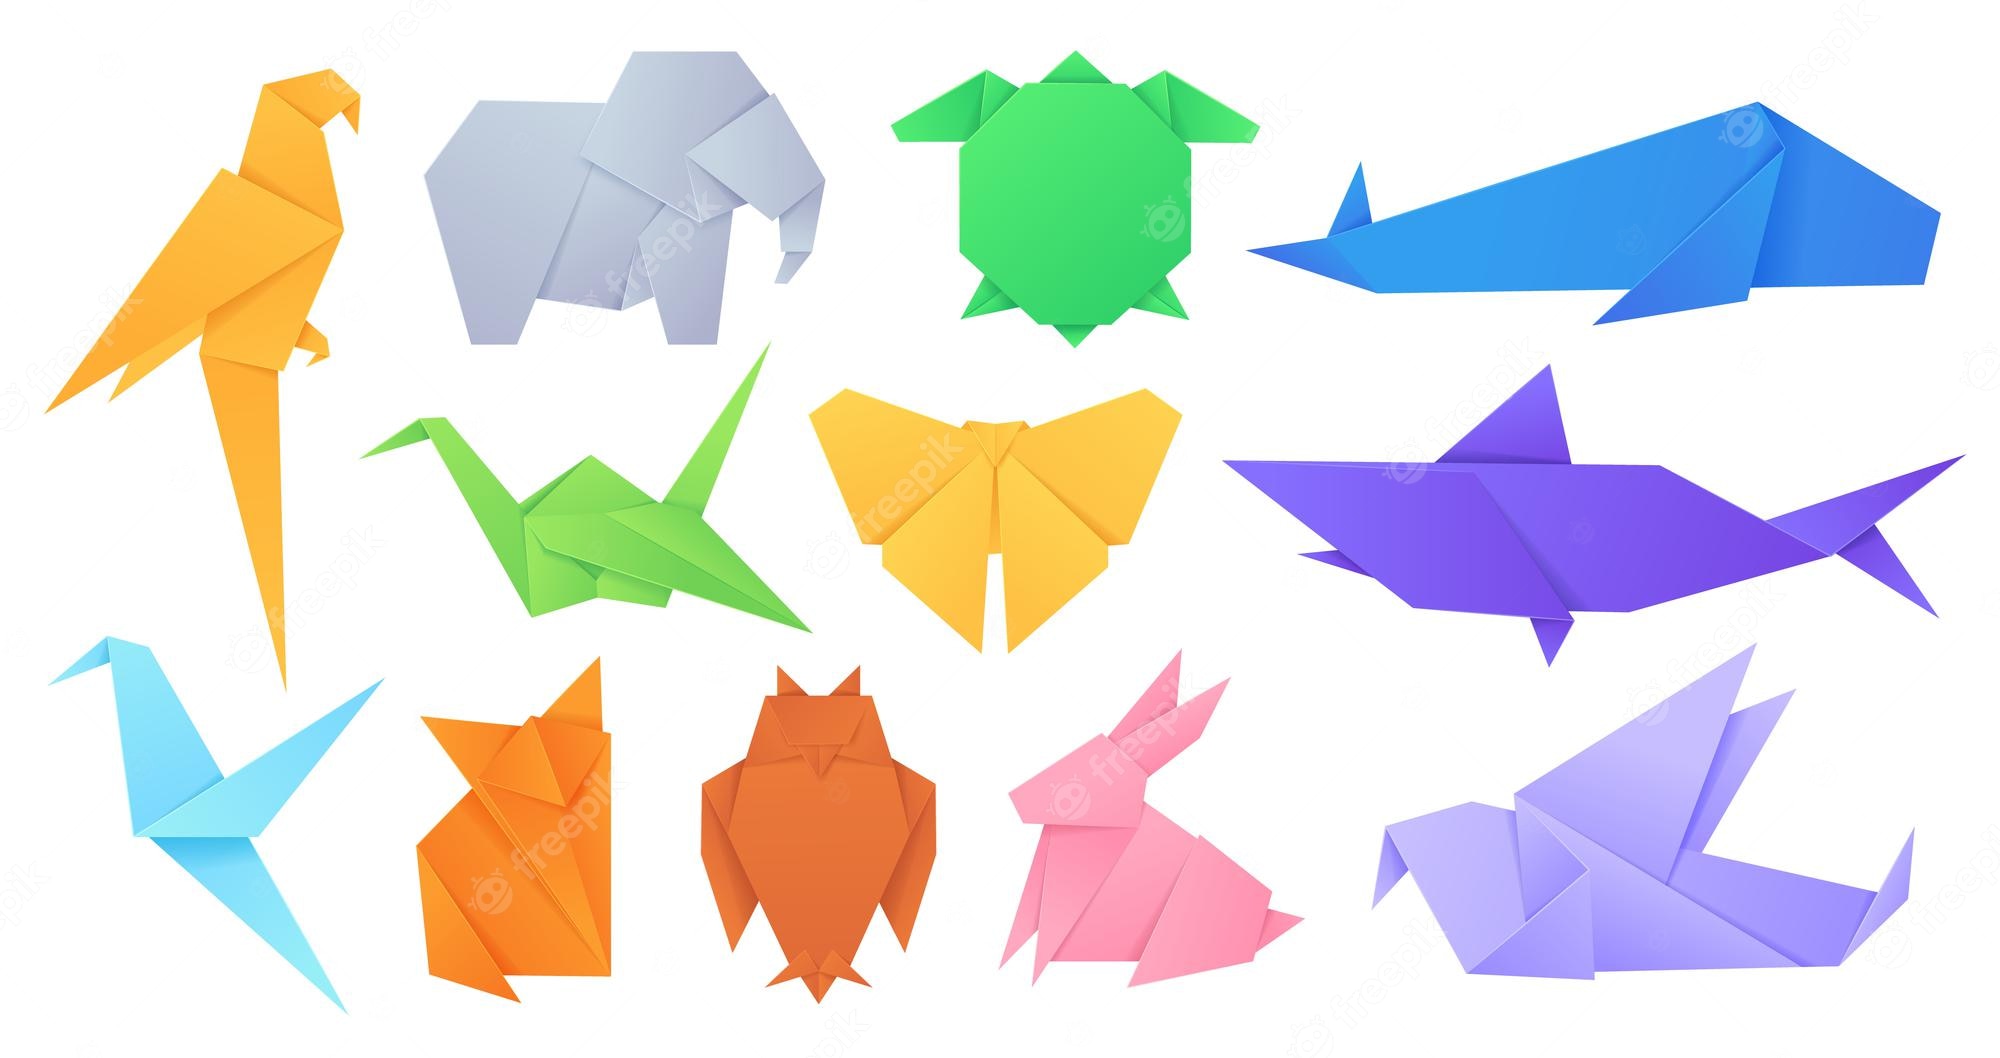 Premium Vector | Paper animals. japanese origami folded toys birds, fox,  butterfly, parrot and hare. cartoon geometric wild animal shaped figures  vector set. illustration origami bird animal, paper toy folded